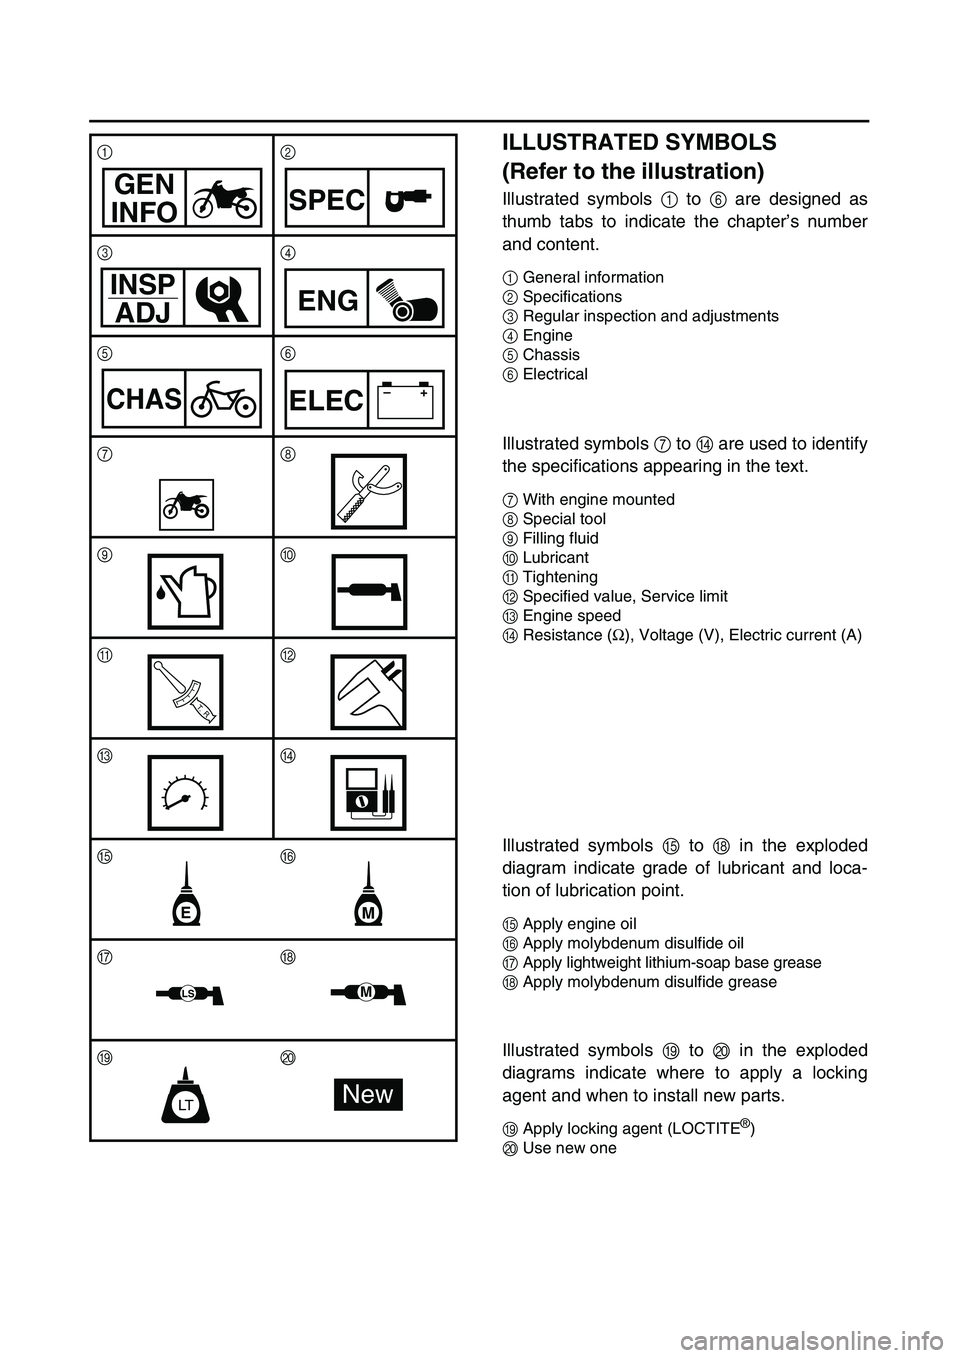 YAMAHA TTR90 2004 User Guide  
ILLUSTRATED SYMBOLS 
(Refer to the illustration) 
Illustrated symbols  
1  
 to   
6  
 are designed as
thumb tabs to indicate the chapter’s number
and content. 
1 
General information 
2 
Specifi